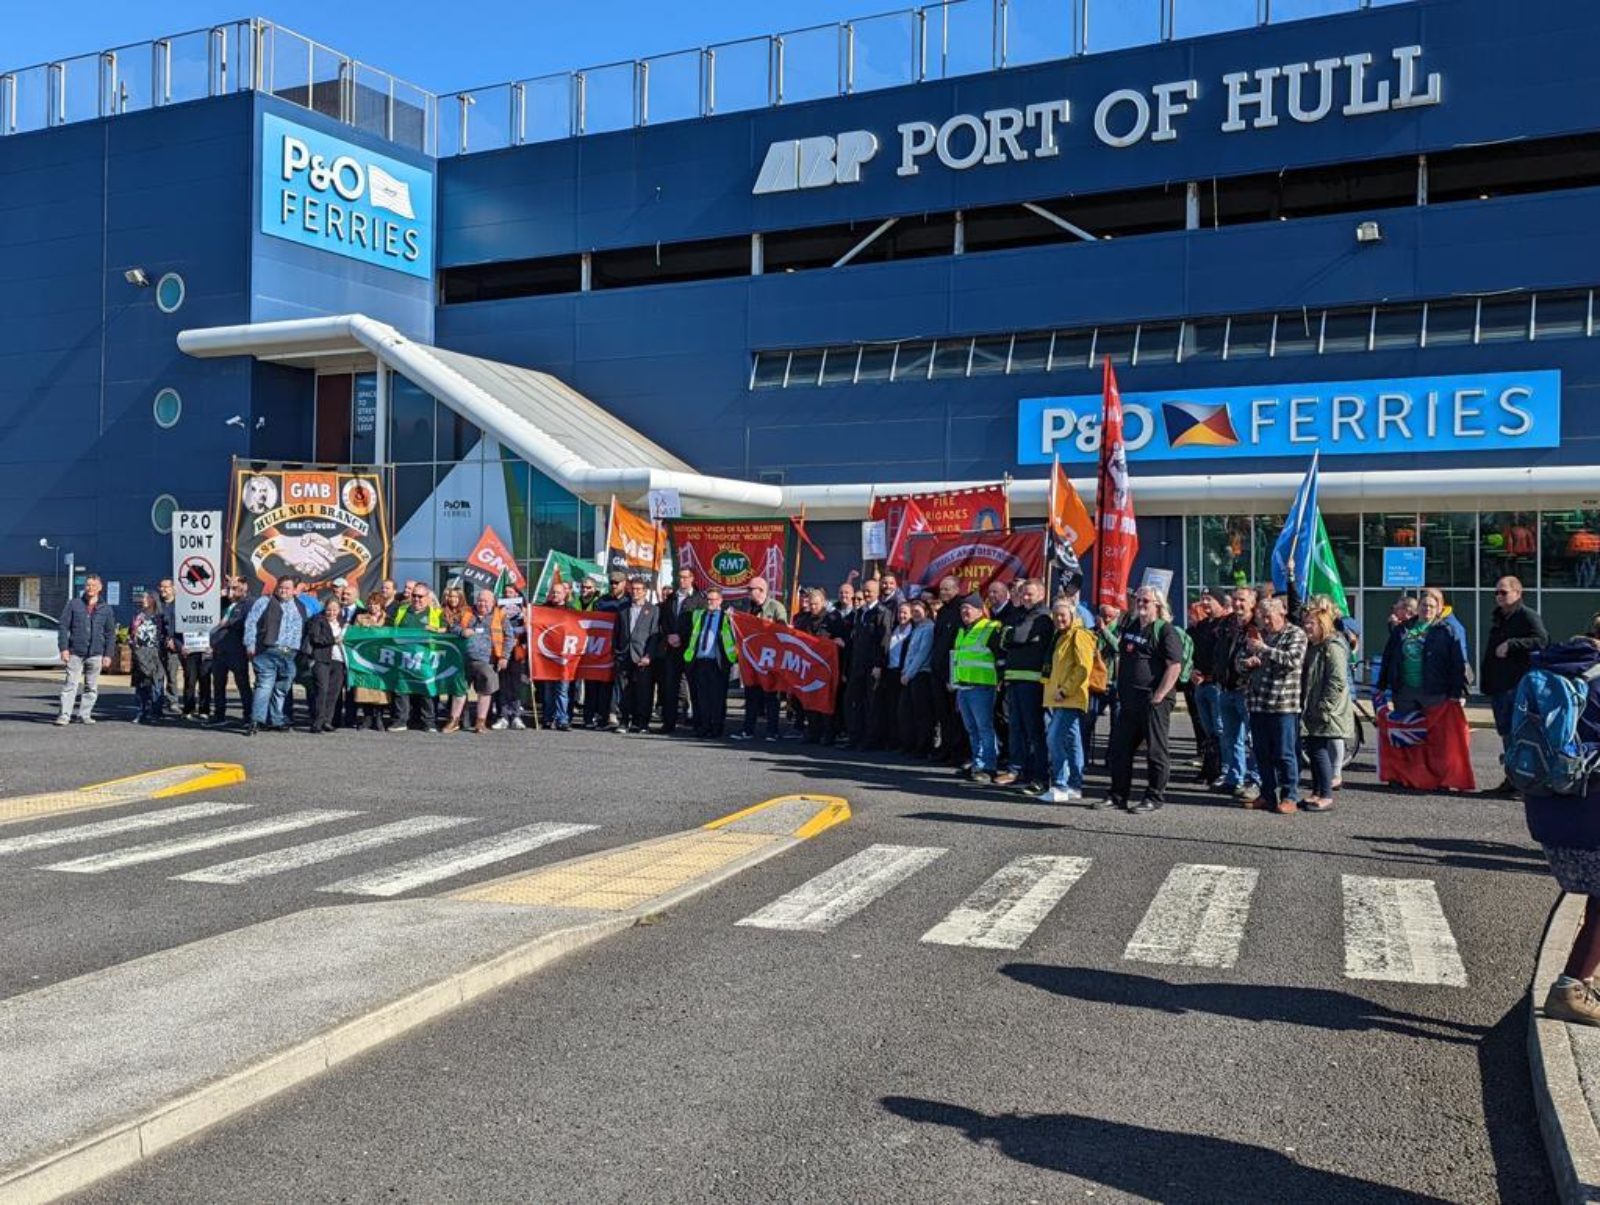 Crowd gathered outside P&O ferry terminal in Hull 